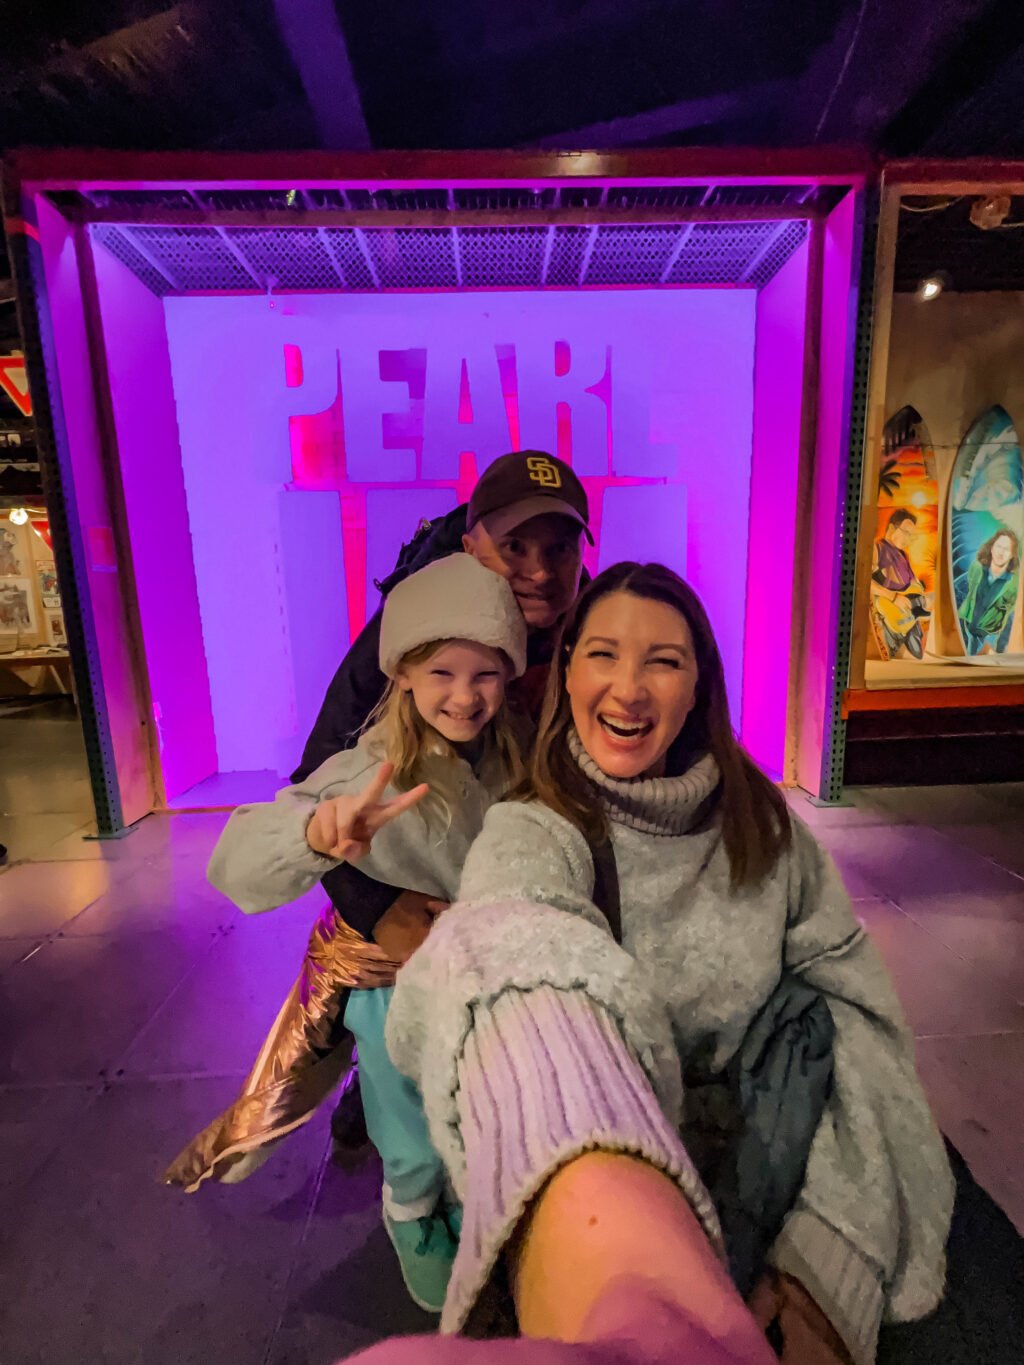 The Museum of Pop Culture is a must do when visiting Seattle!